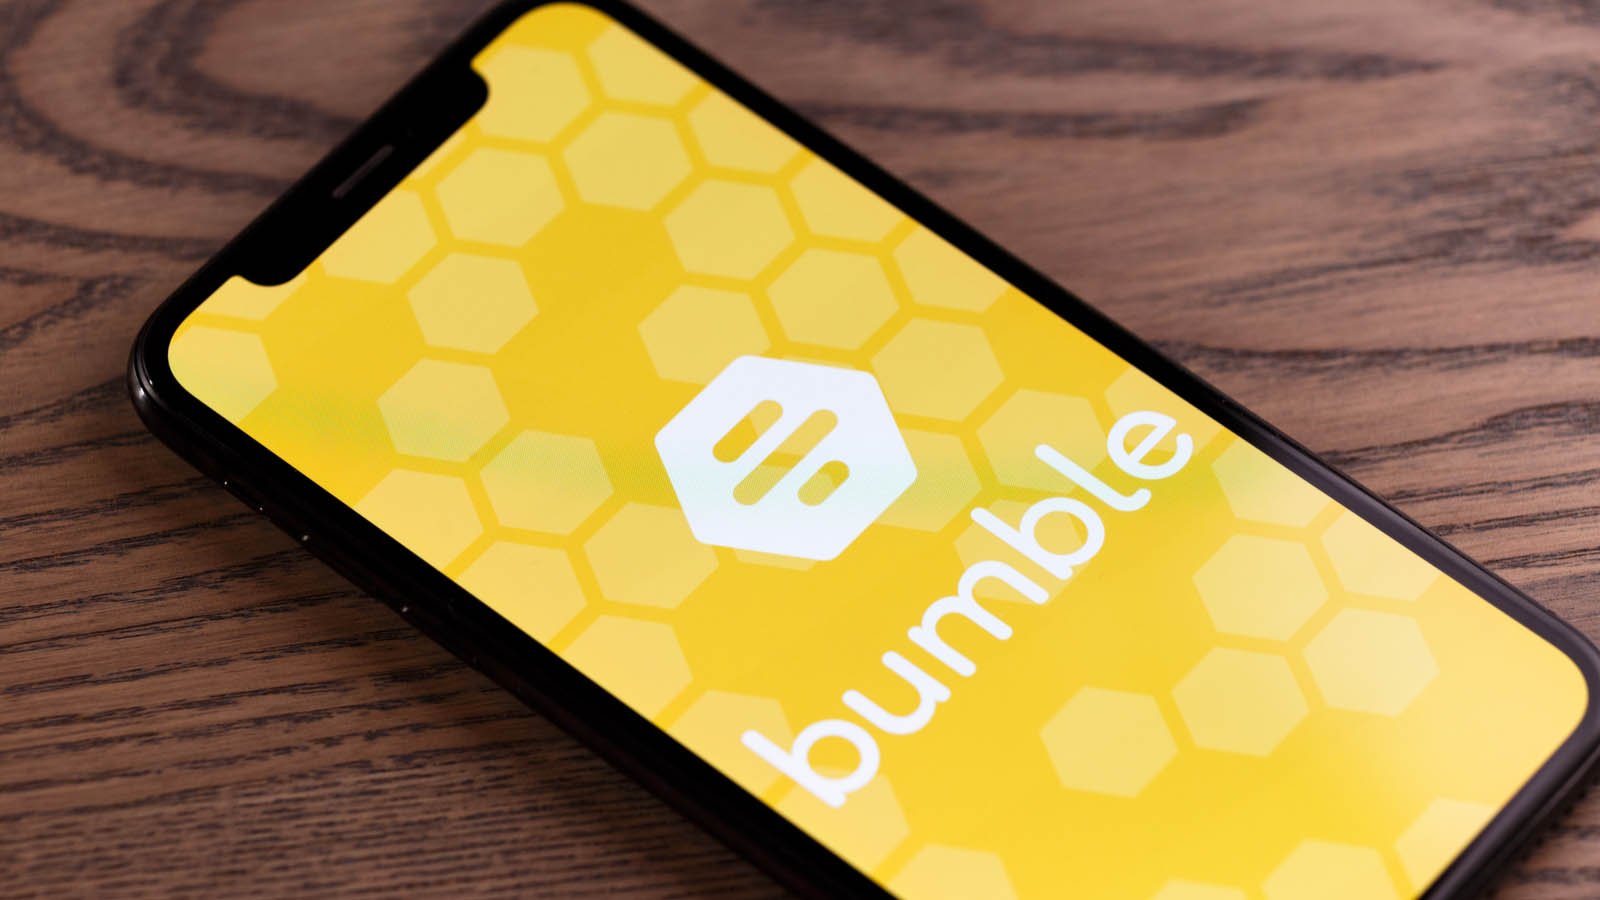 BMBL Stock: Bumble Is a Dating App IPO You Don’t Want to ...